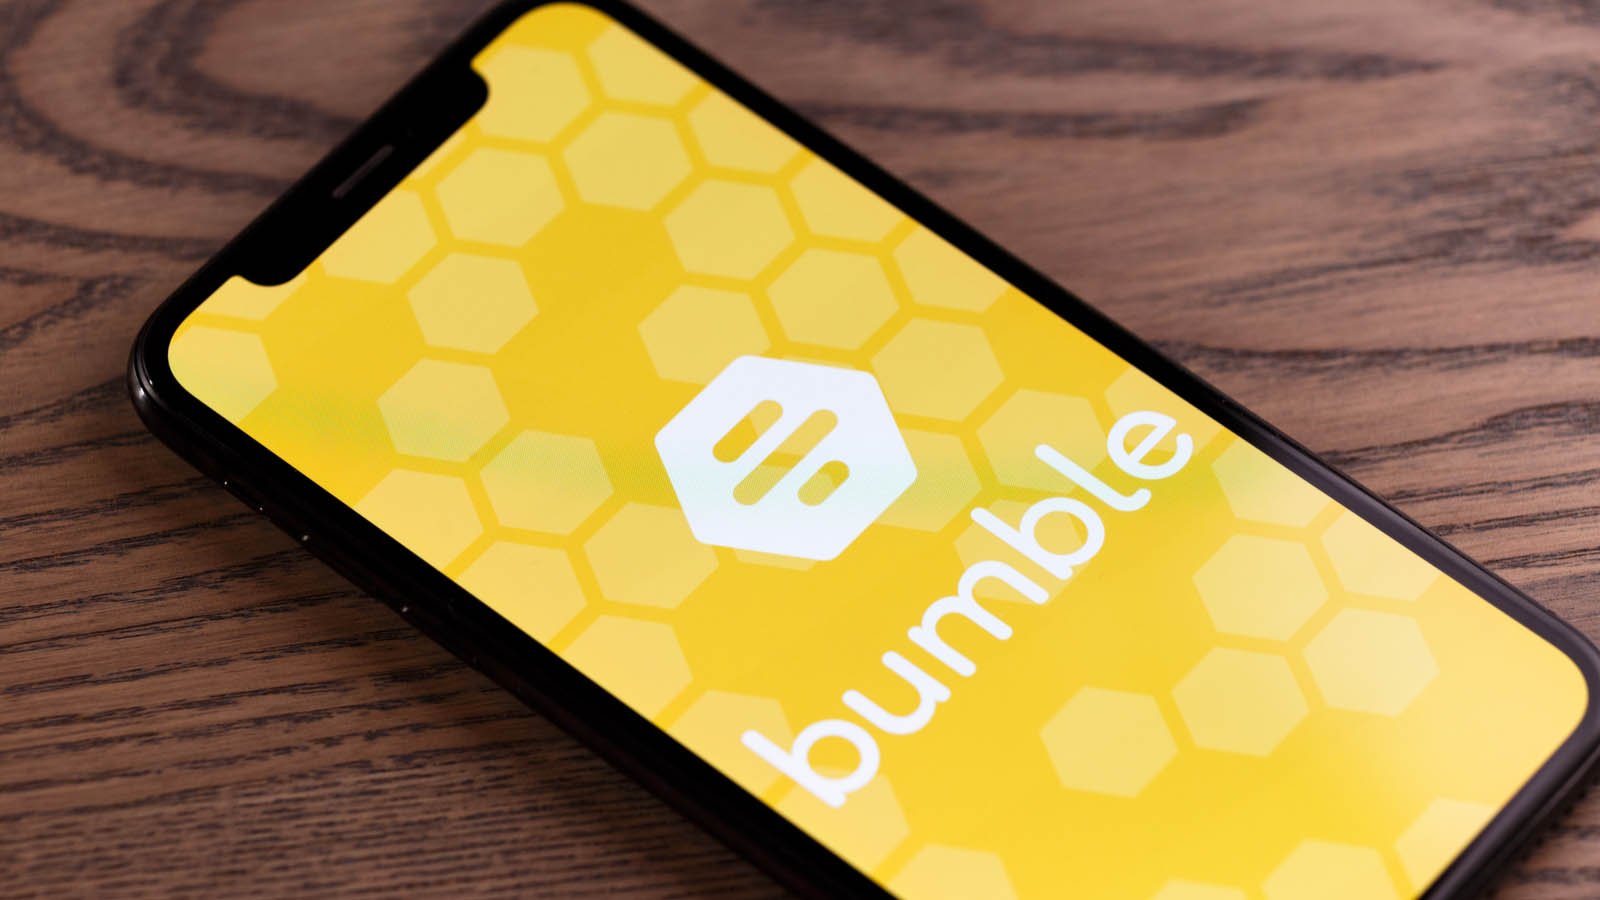 BMBL Stock: Bumble Is a Dating App IPO You Don’t Want to ...